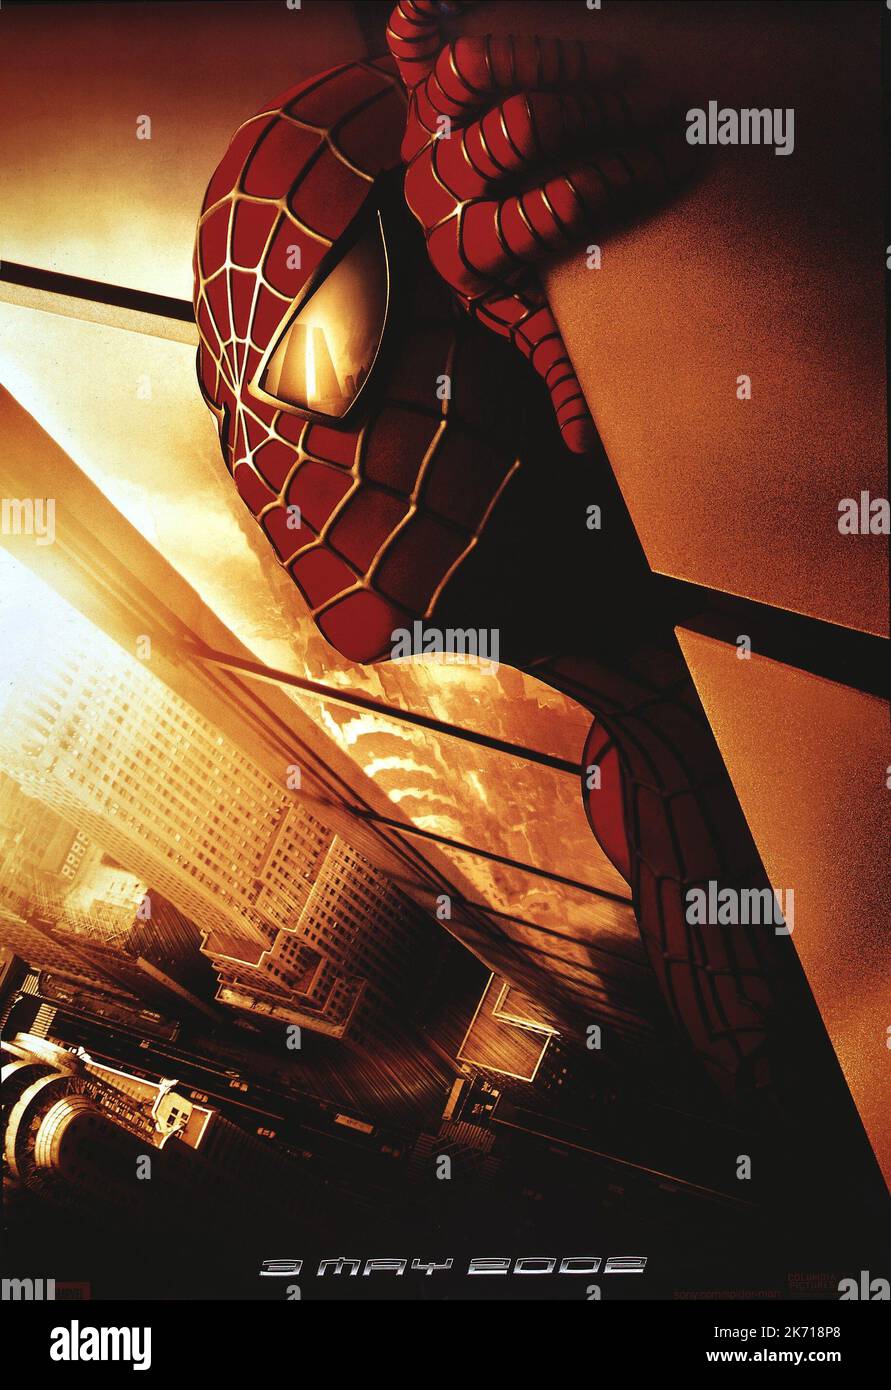 TOBEY MAGUIRE MOVIE POSTER, SPIDER-MAN, 2002 Stock Photo